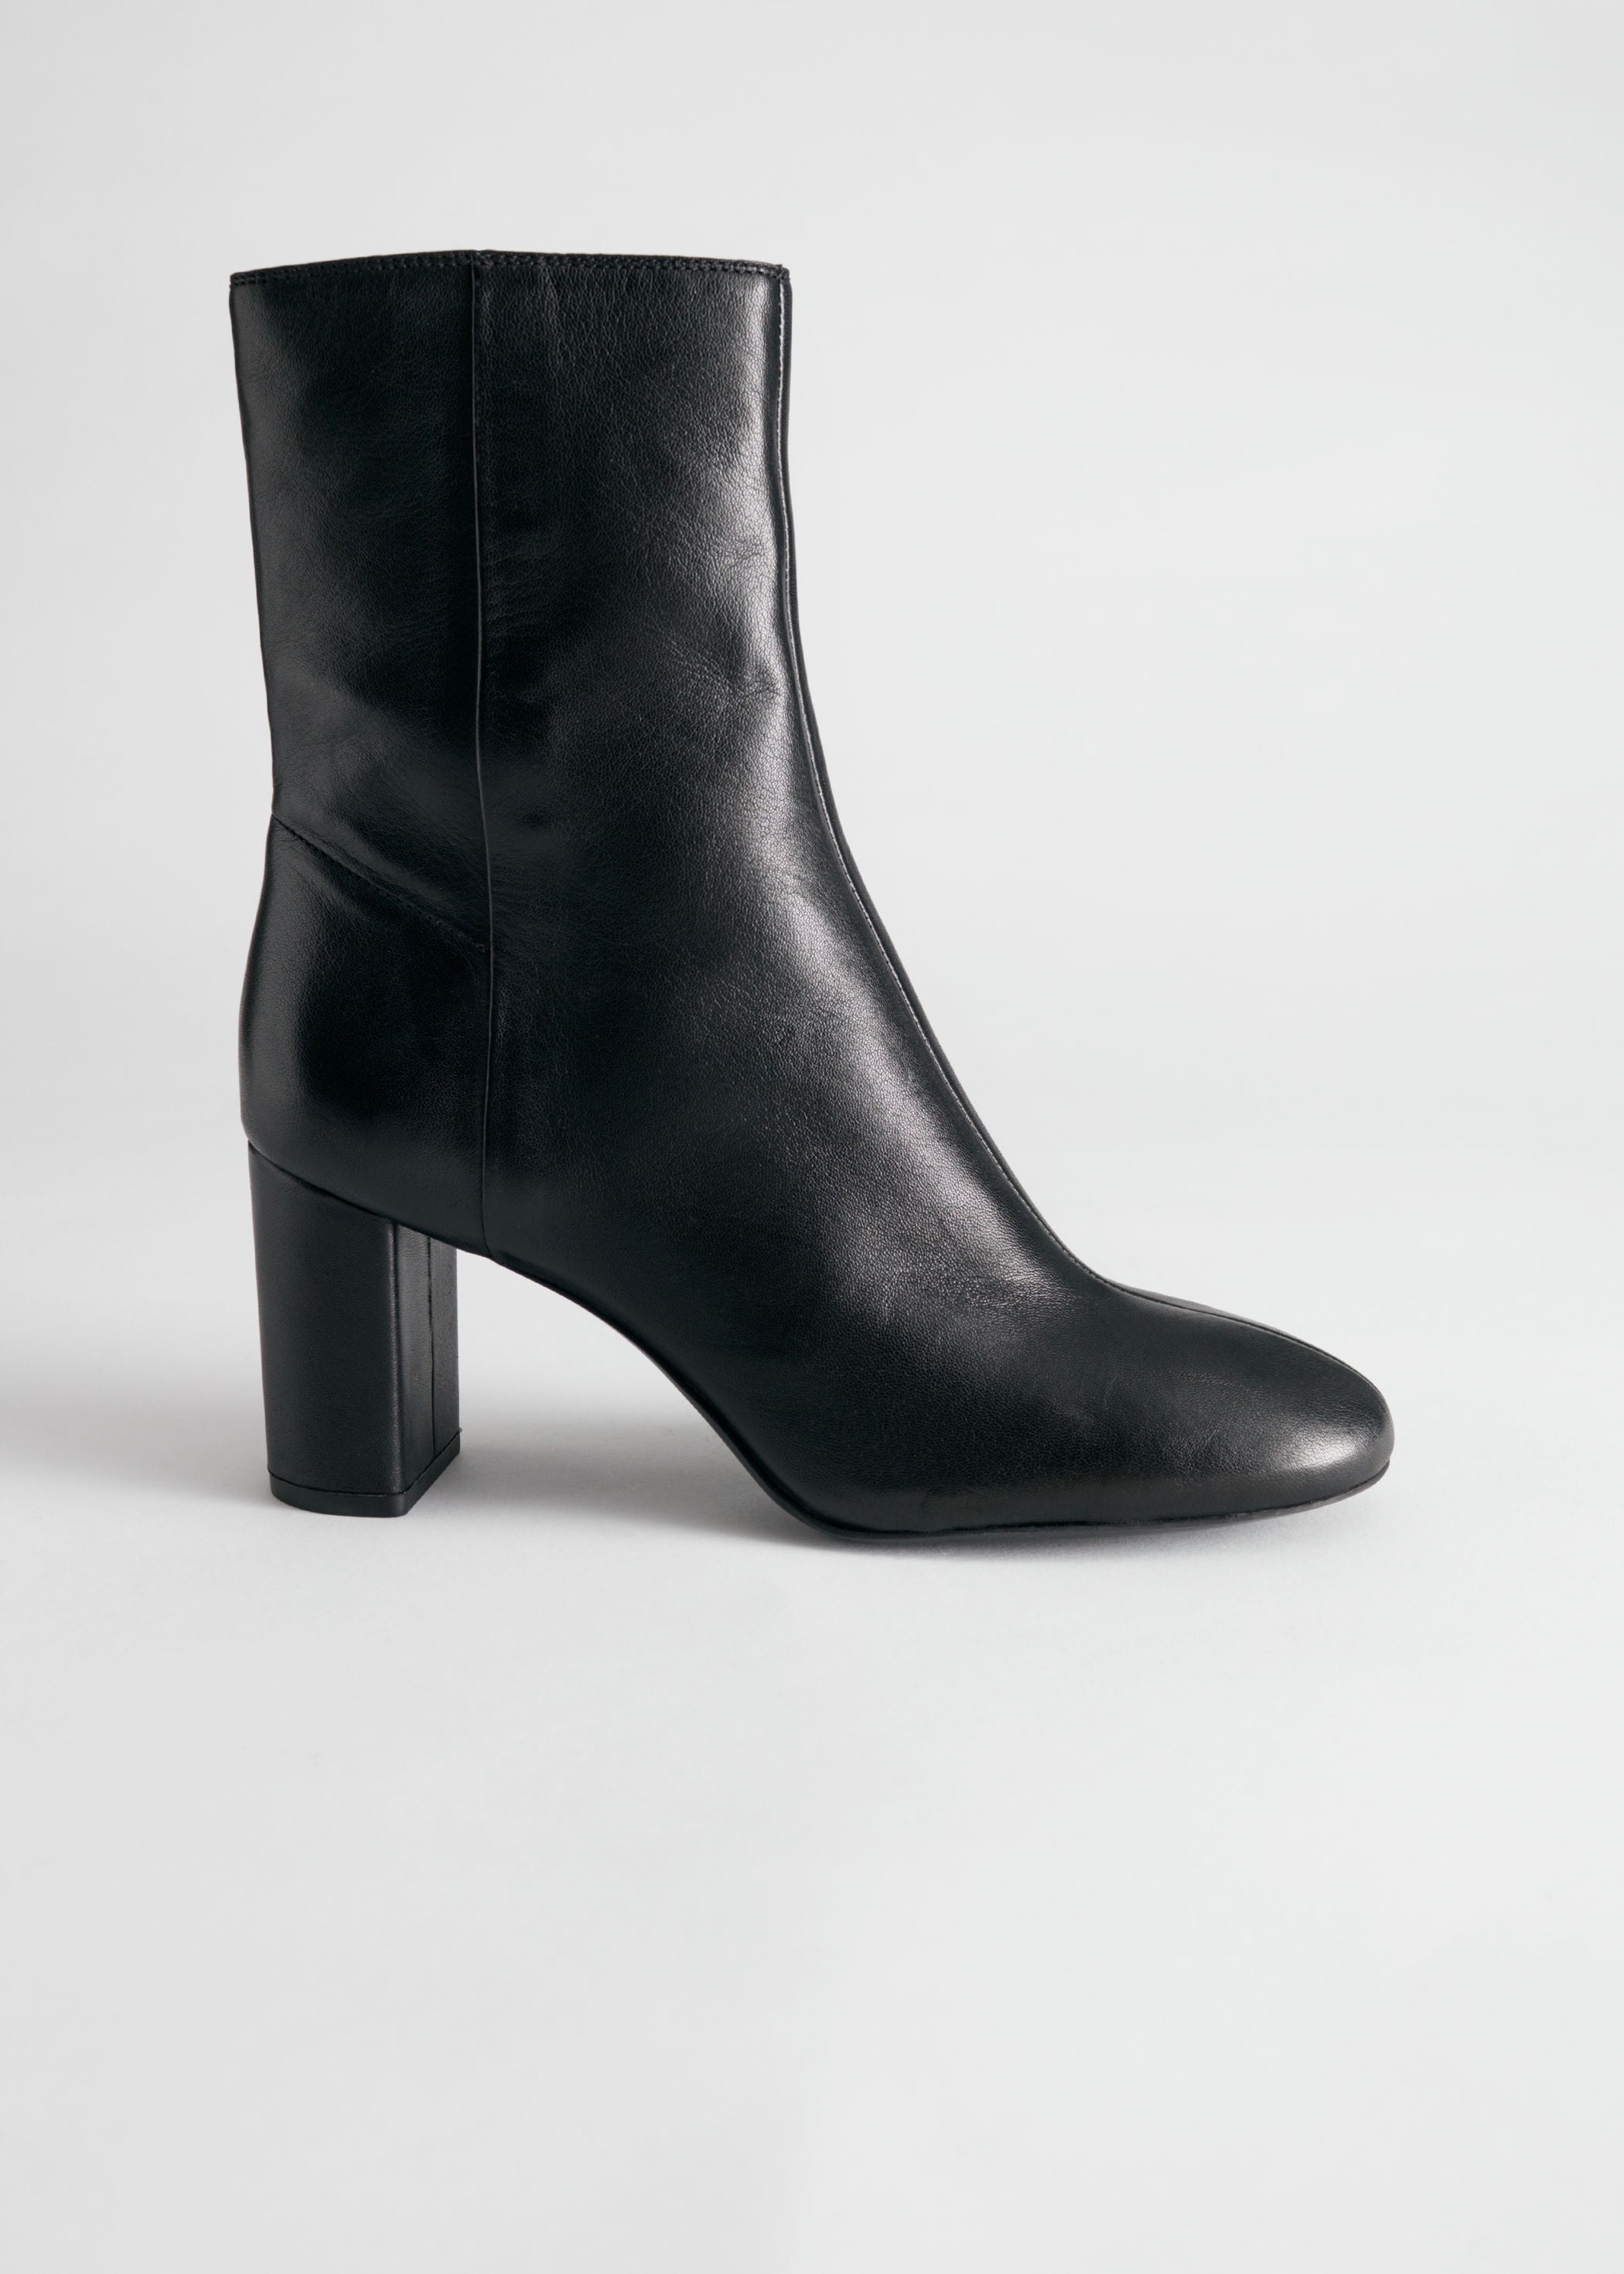 & Other Stories + Smooth Leather Block Heel Boots